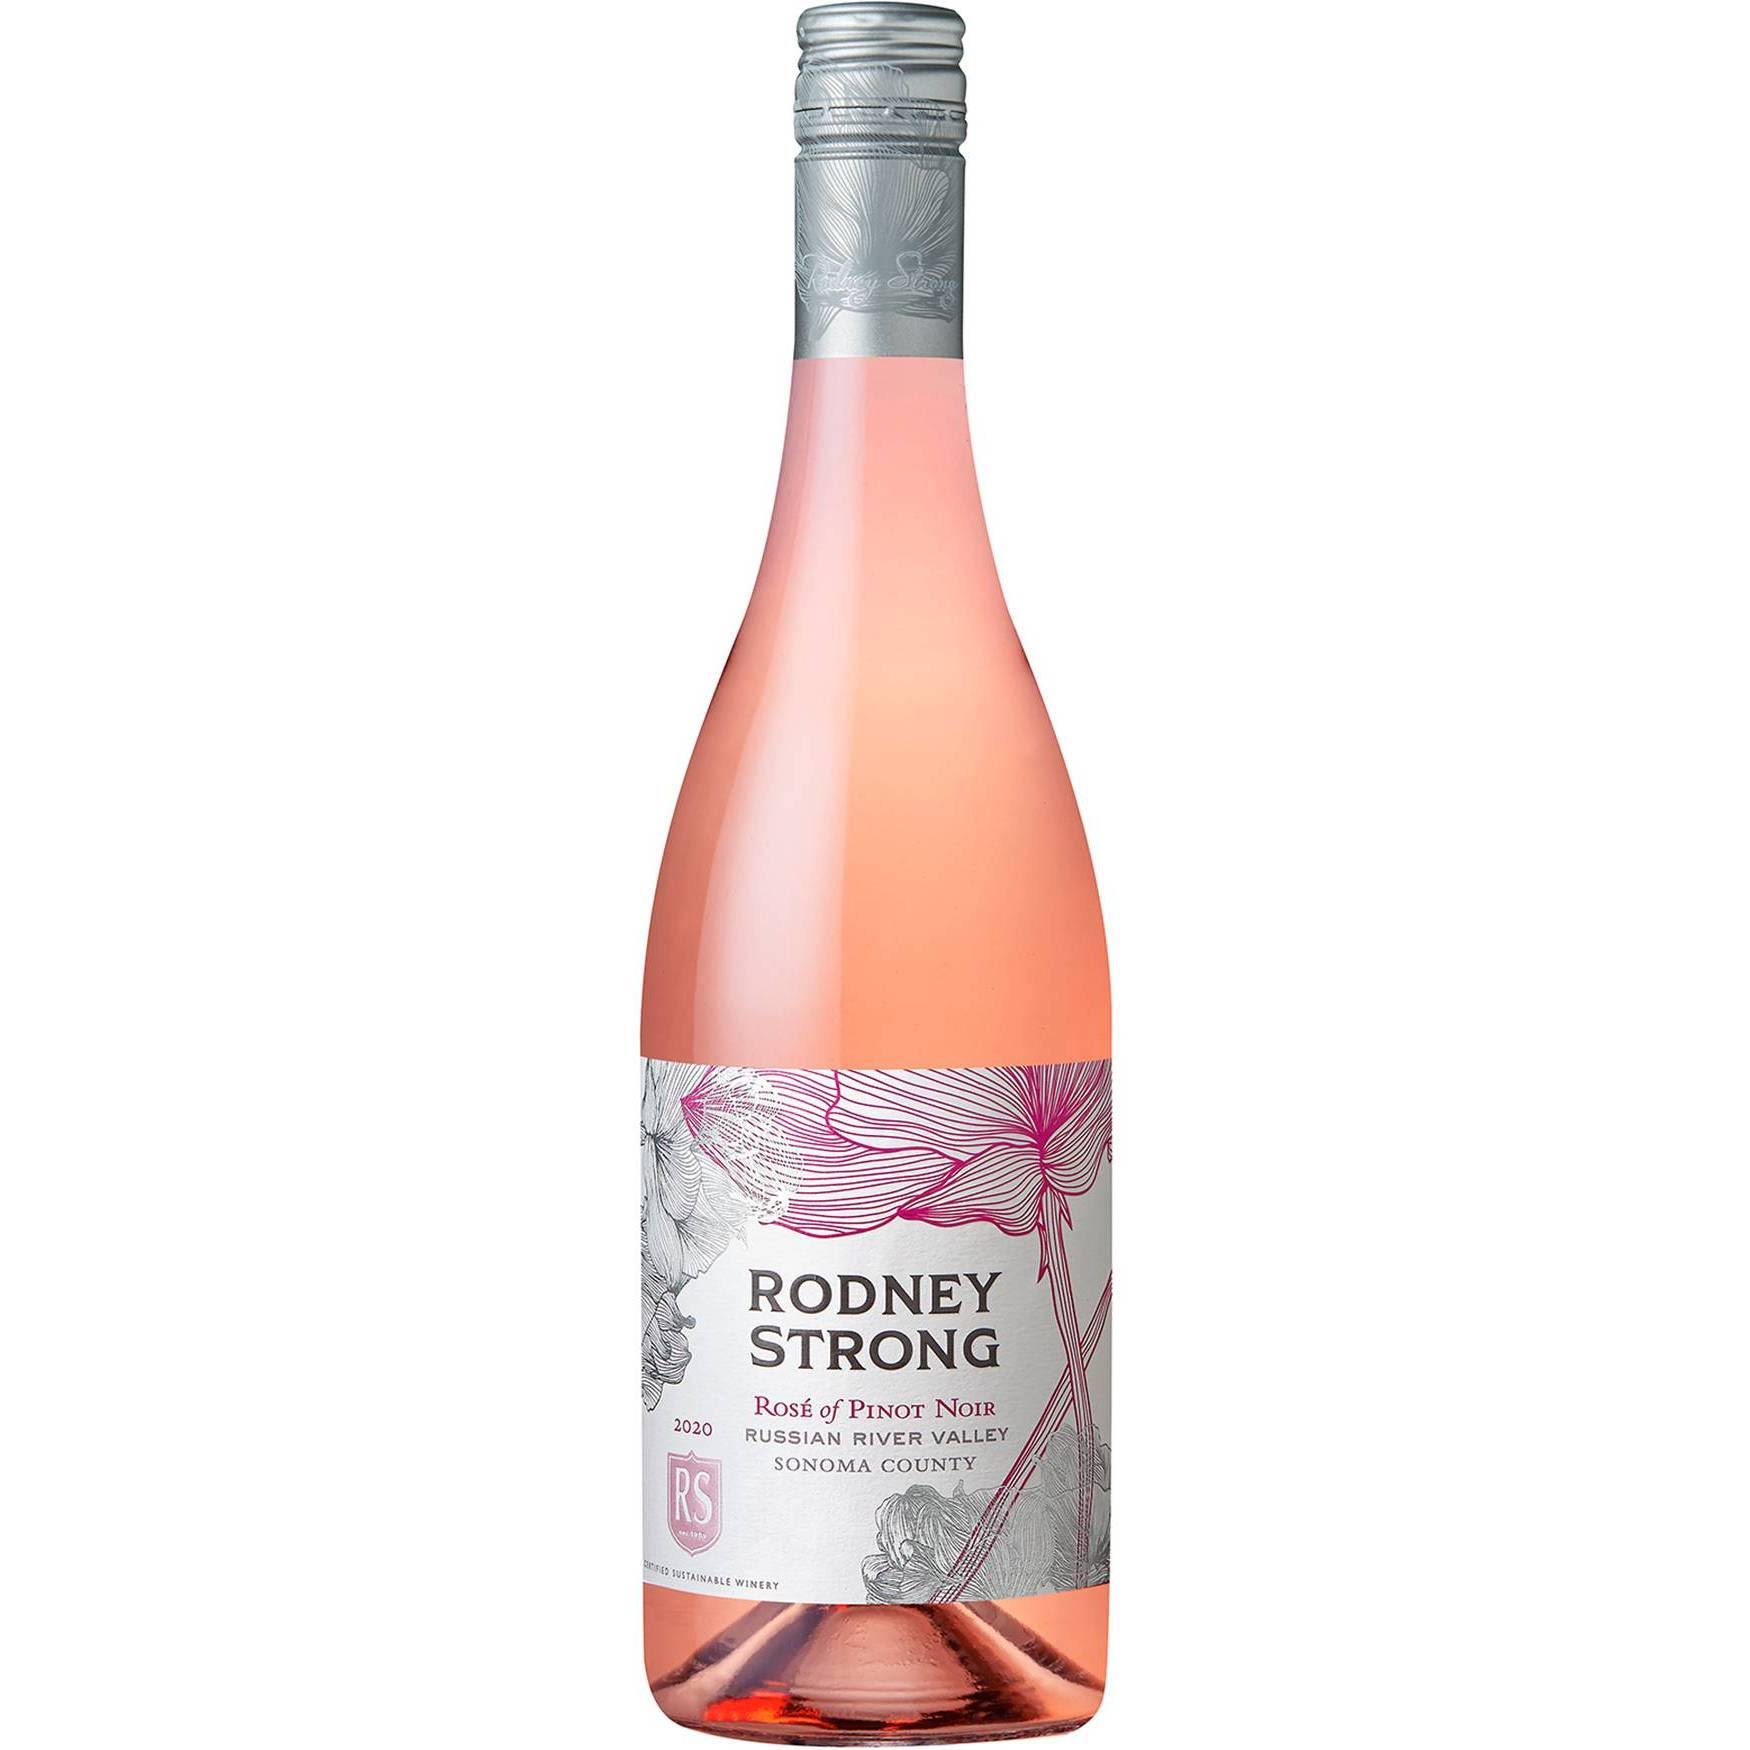 Rodney Strong Rose of Pinot Noir, Russian River Valley, Sonoma County - 750 ml